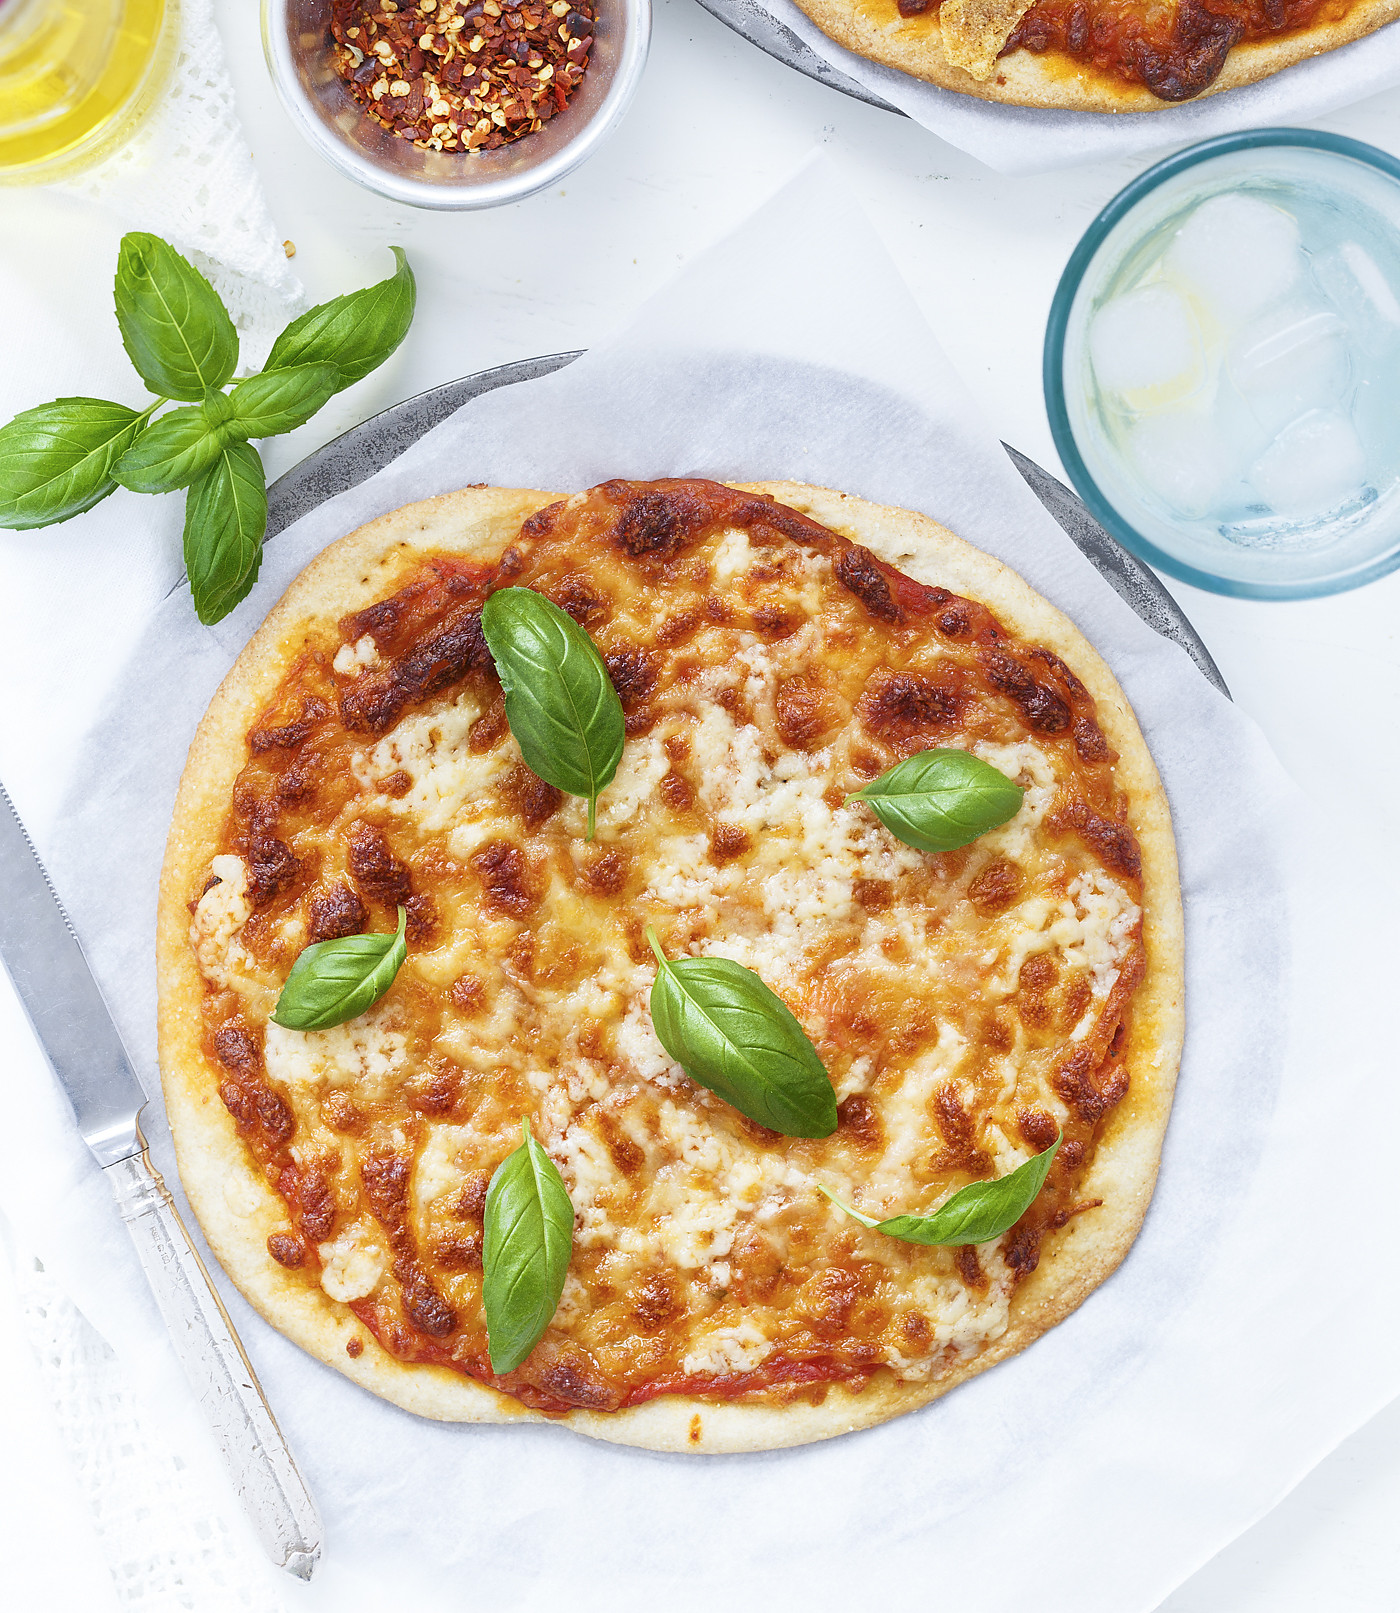 Classic Pizza Margherita Recipe - Pizza Topped With Cheese And Tomato Sauce